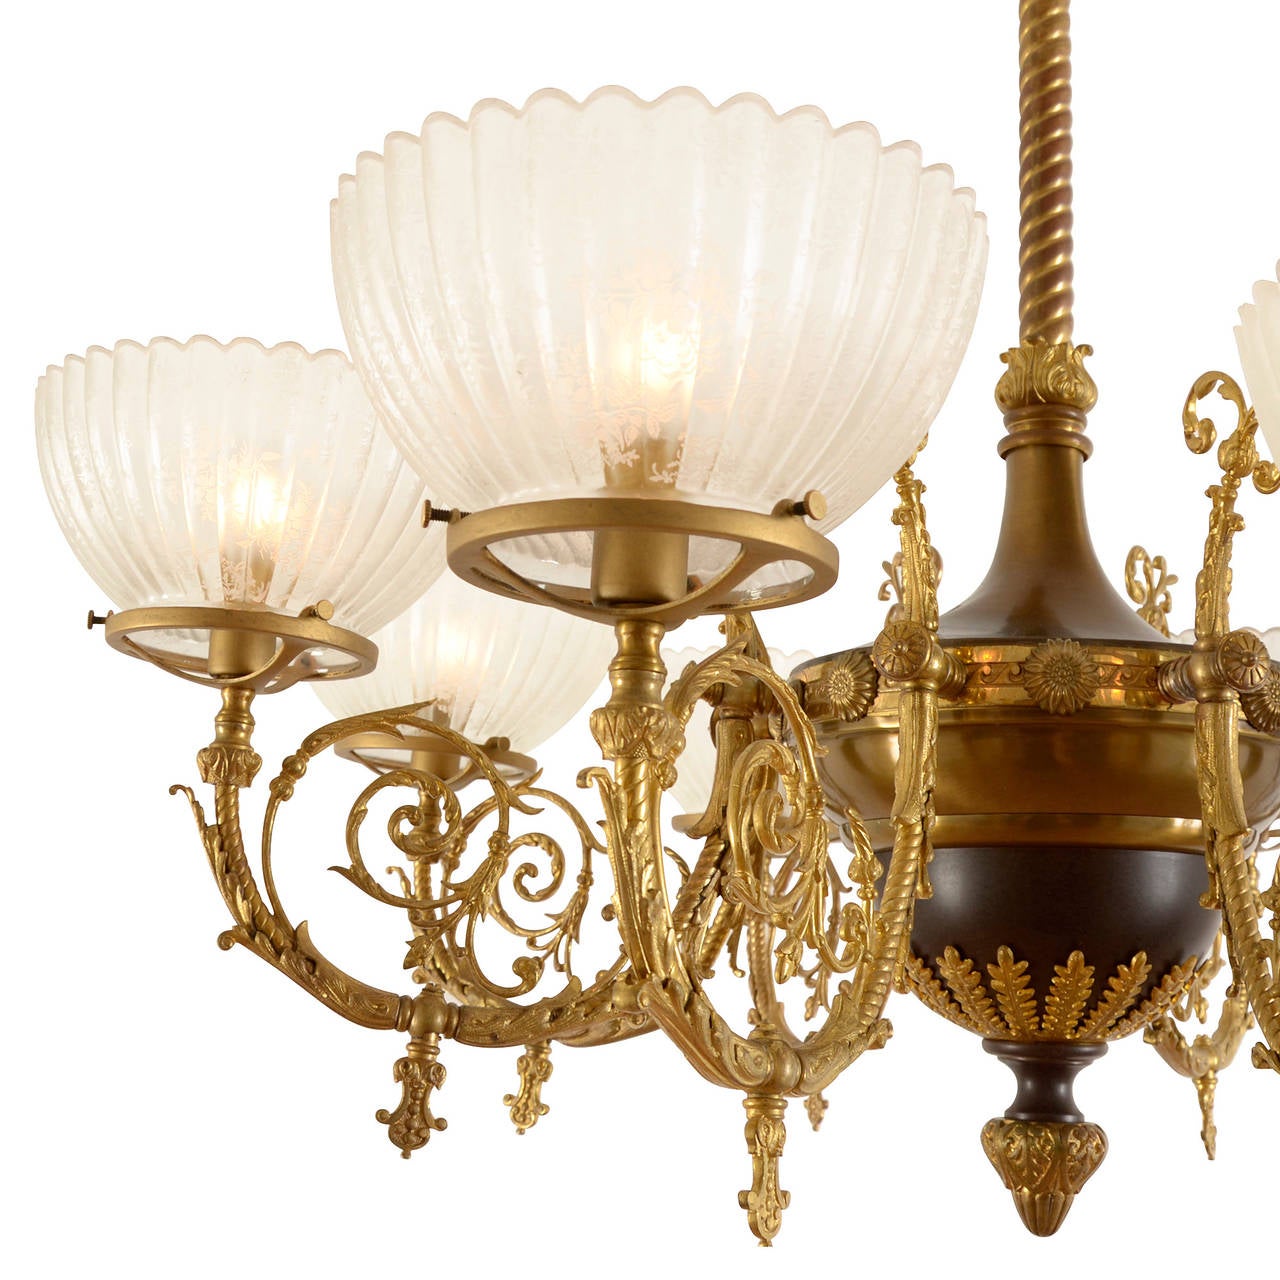 North American Eight-Light Beaux Arts Chandelier with Ornate Ormolu, circa 1895